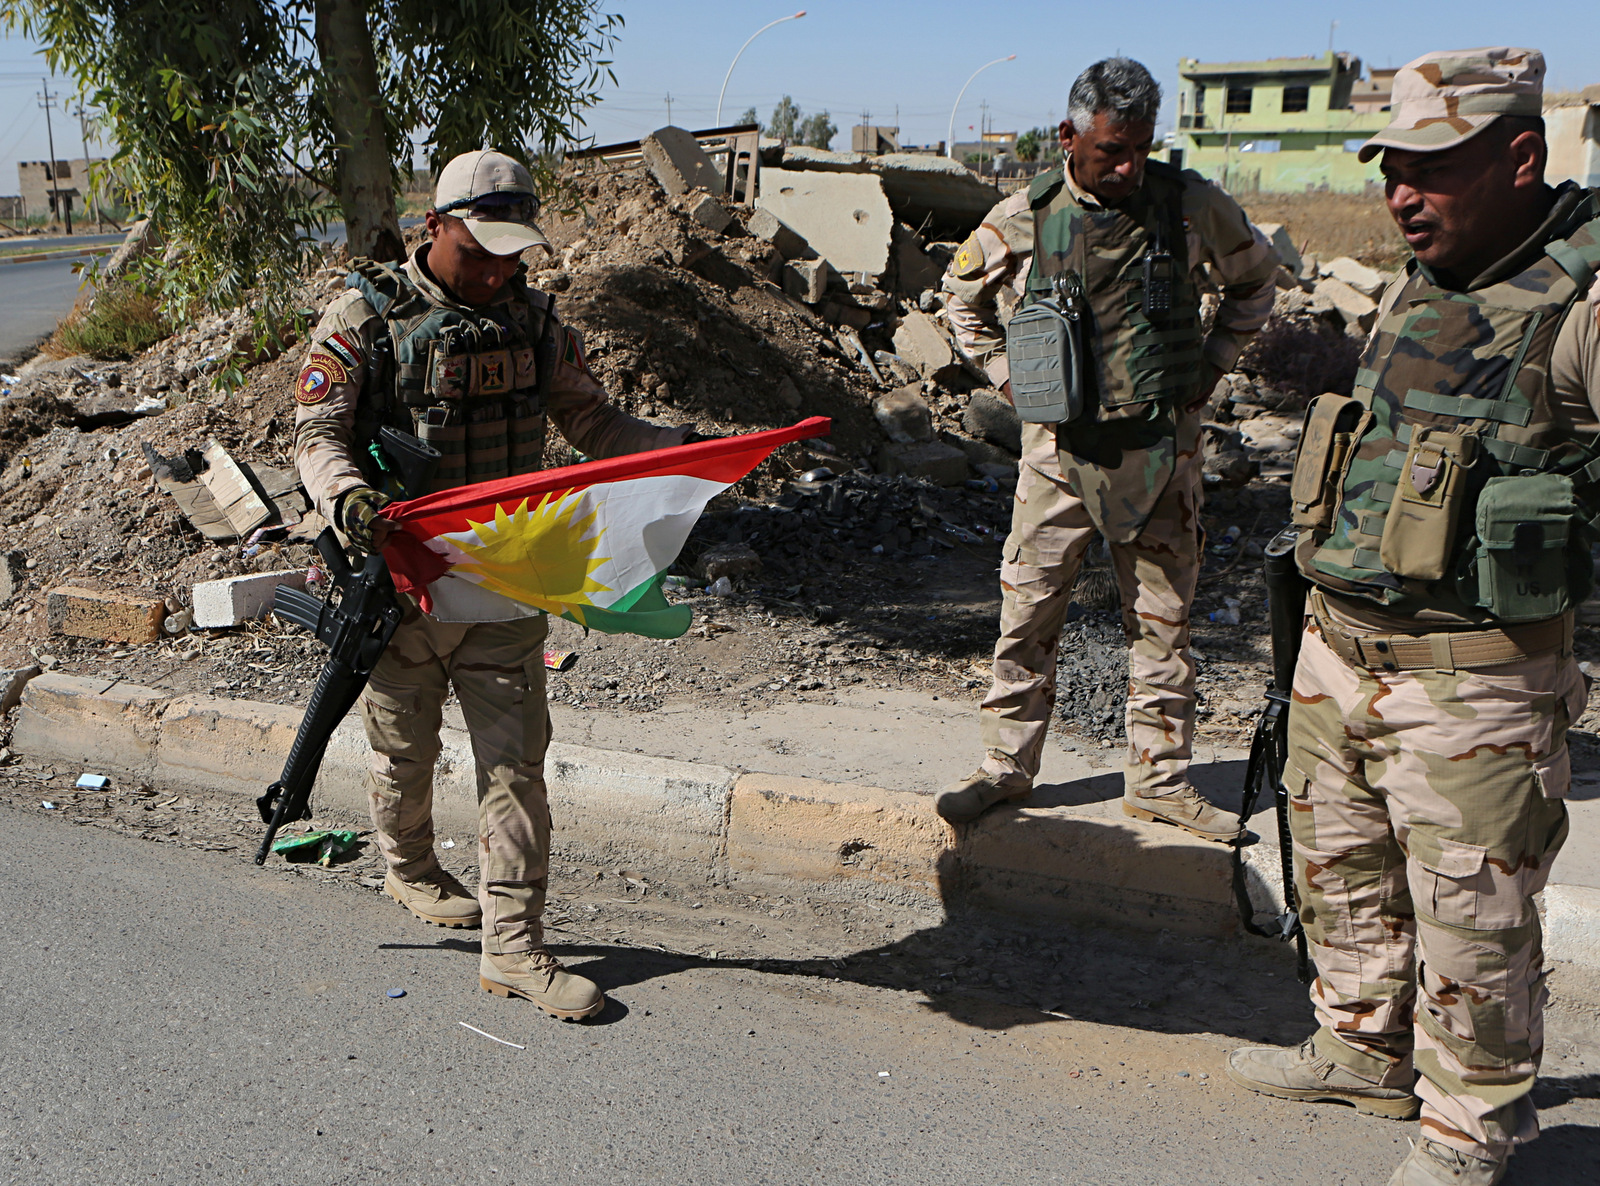 Iraqi soldiers remove a Kurdish flag from a checkpoint in Bashiqa, Iraq, Oct. 18, 2017. Iraqi forces retook control of the town on the northeastern outskirts of Mosul. Kurdish forces pulled out of disputed areas across northern and eastern Iraq a day after handing Kirkuk to federal forces amid a tense standoff following last month's vote for independence. (AP/Khalid Mohammed)